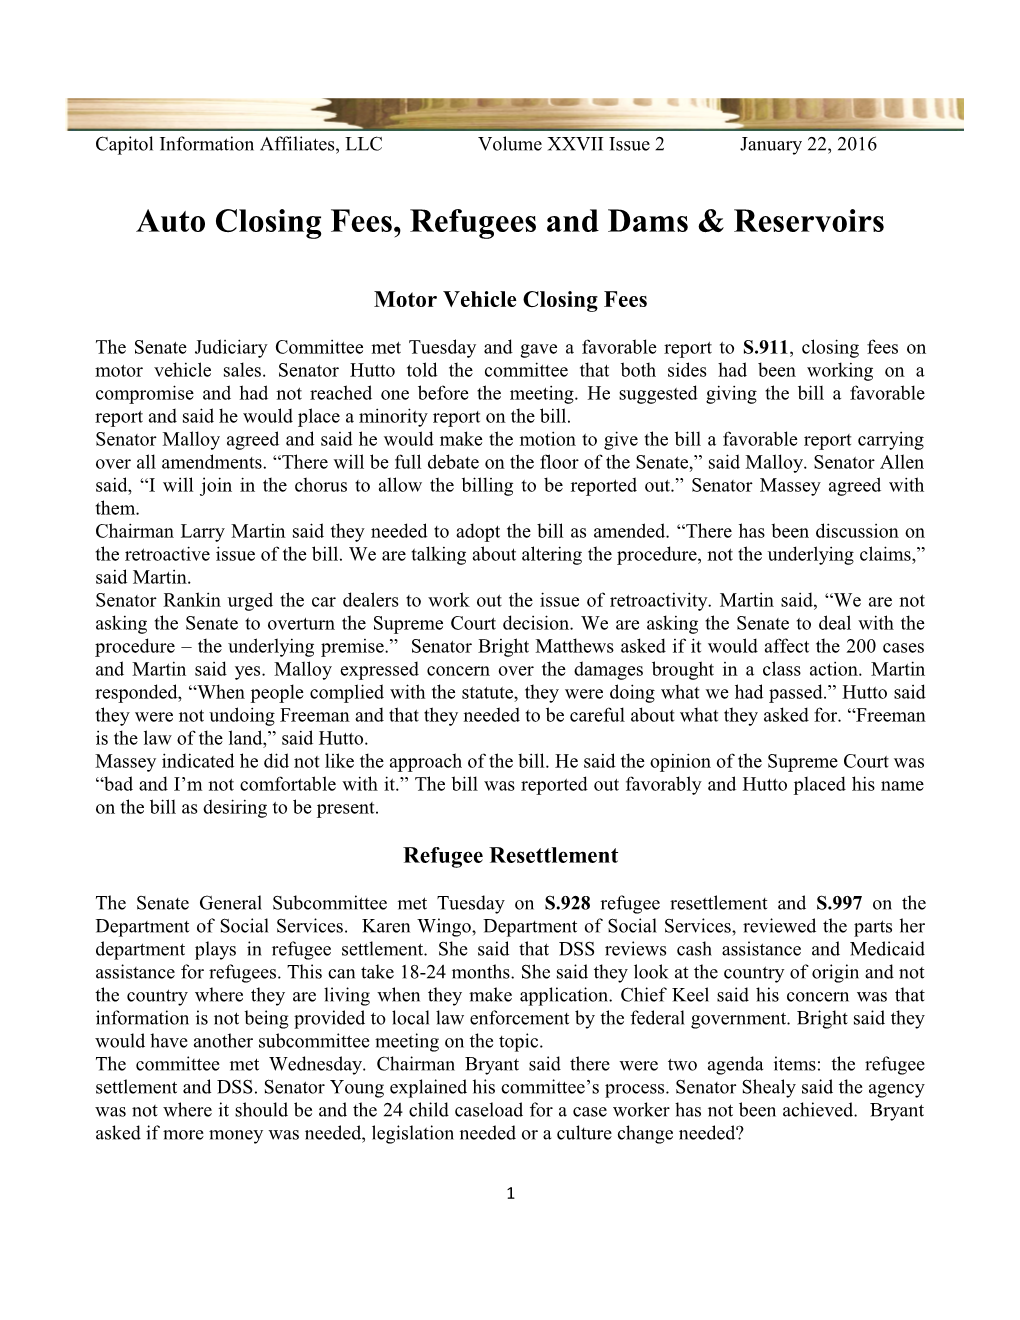 Auto Closing Fees, Refugees and Dams & Reservoirs